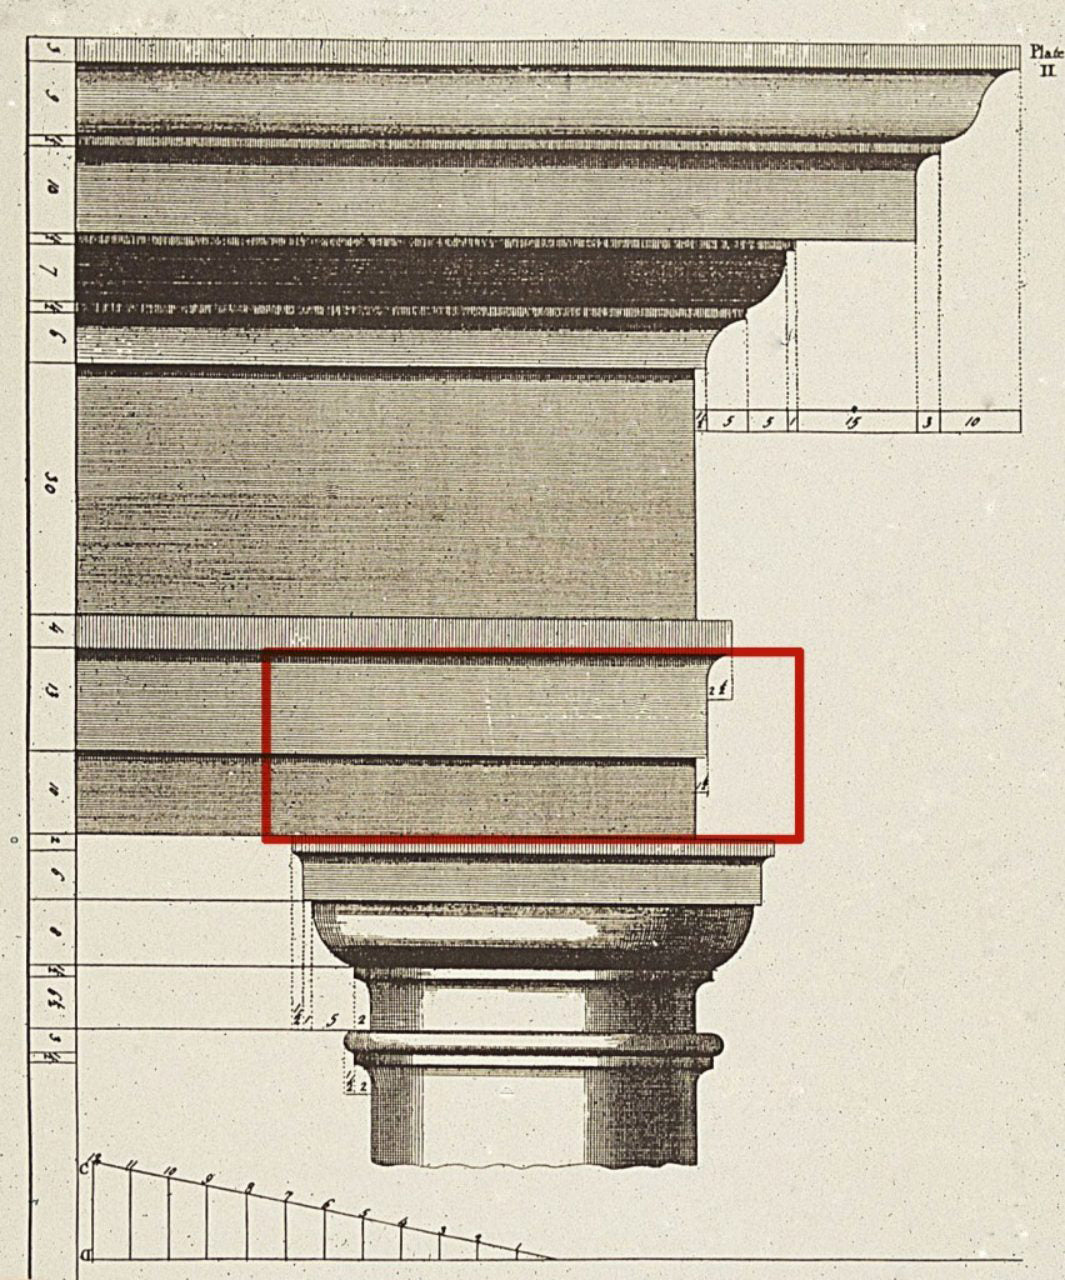 Architrave Illustrated Example - Glossary Image from Brockwell Incorporated